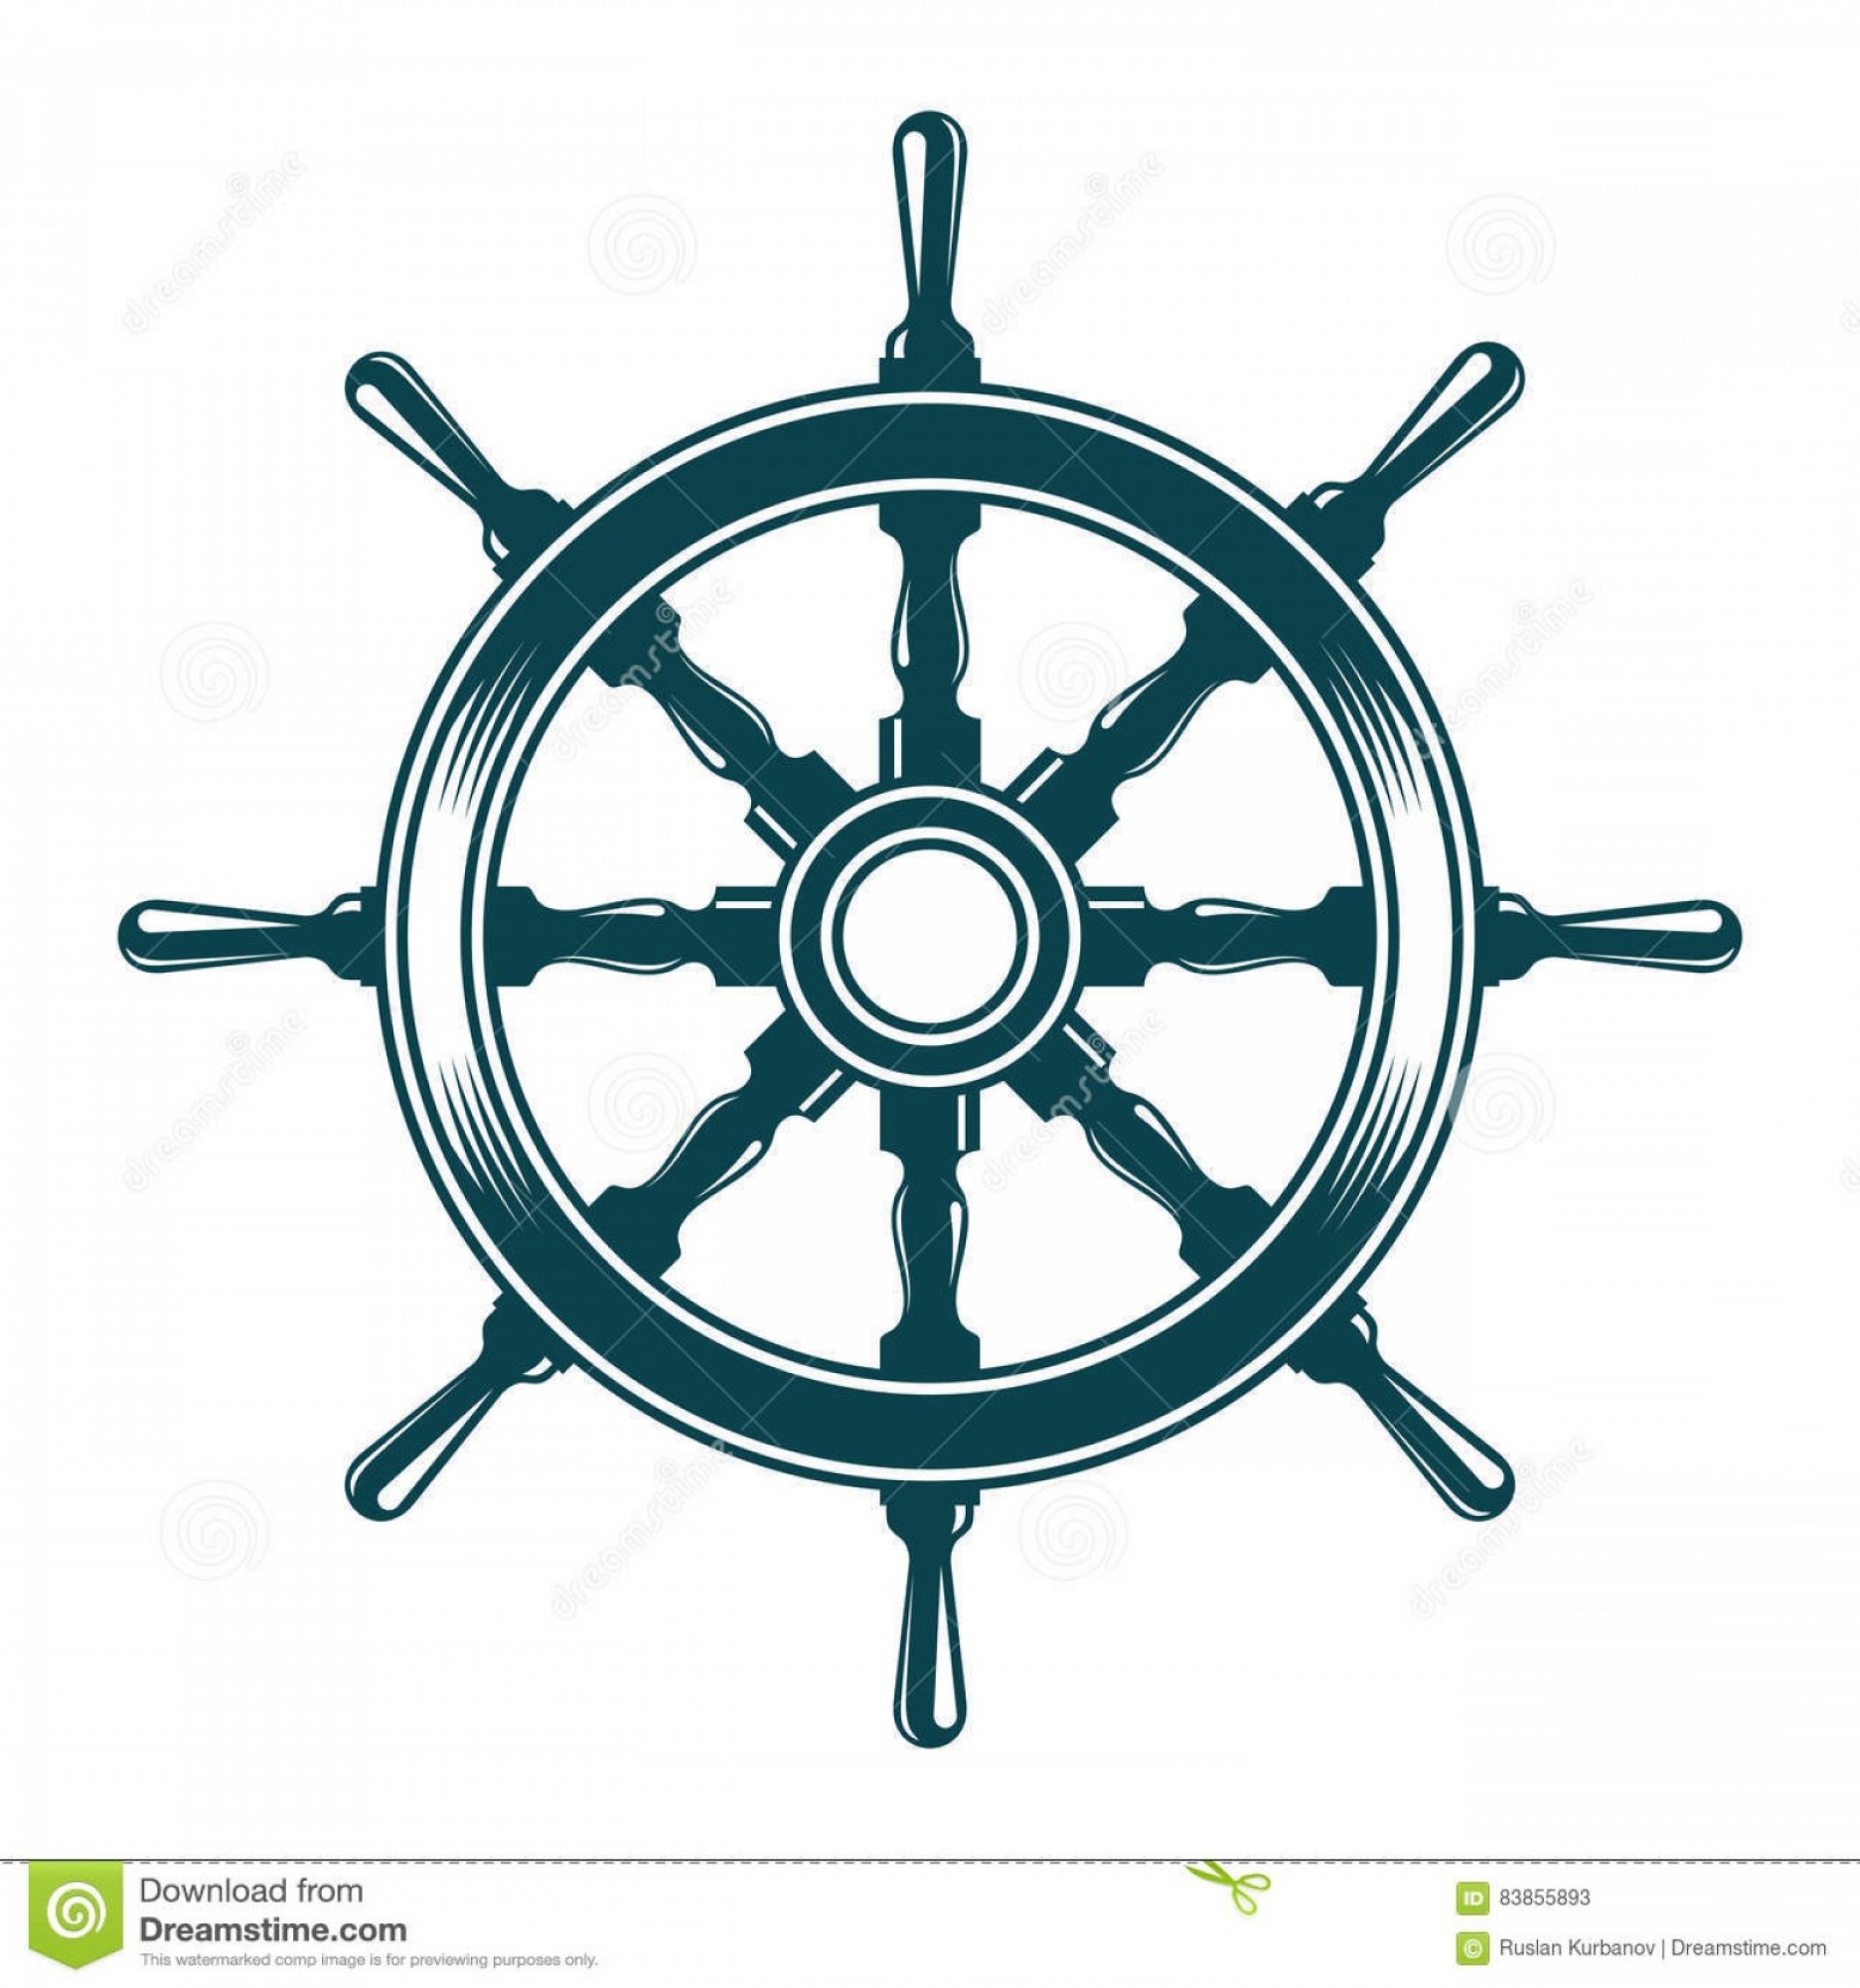 Captains Wheel Vector at Collection of Captains Wheel